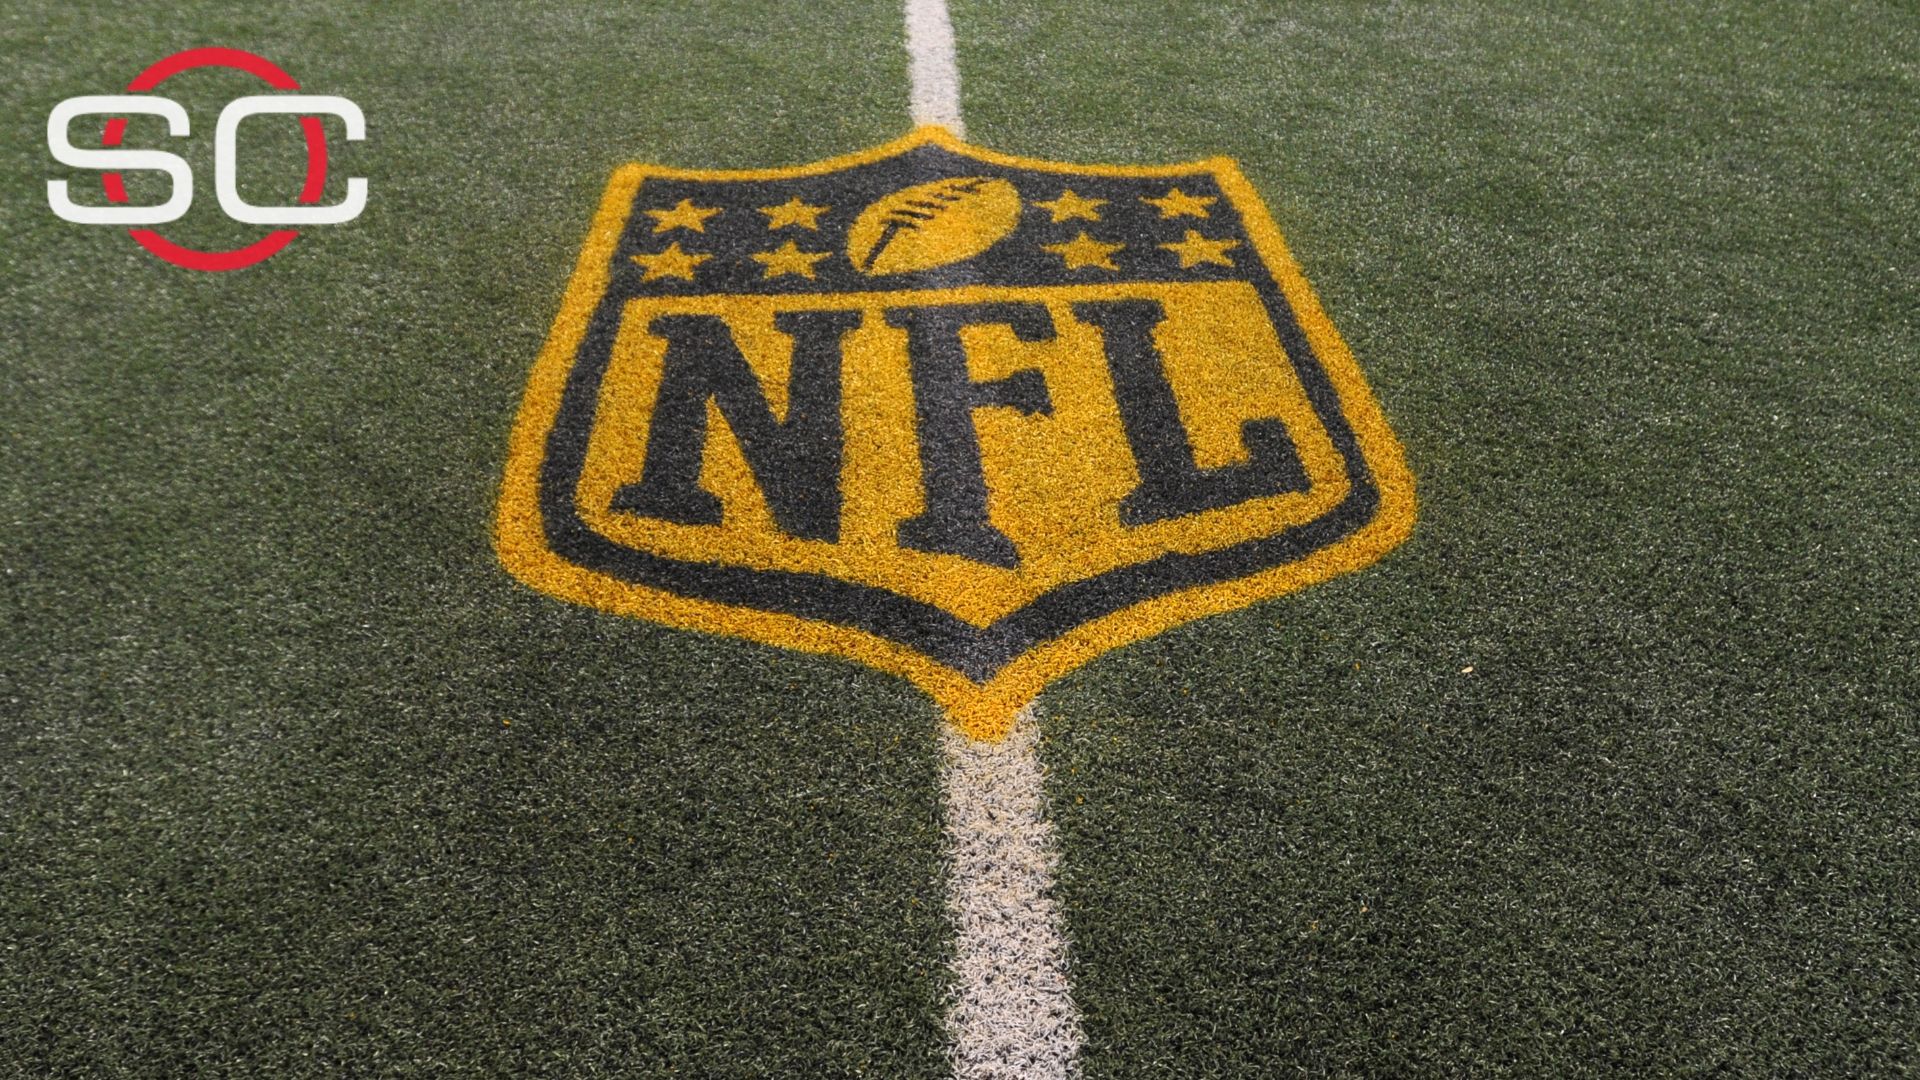 Streaming NFL games will boost Twitter's bottom line